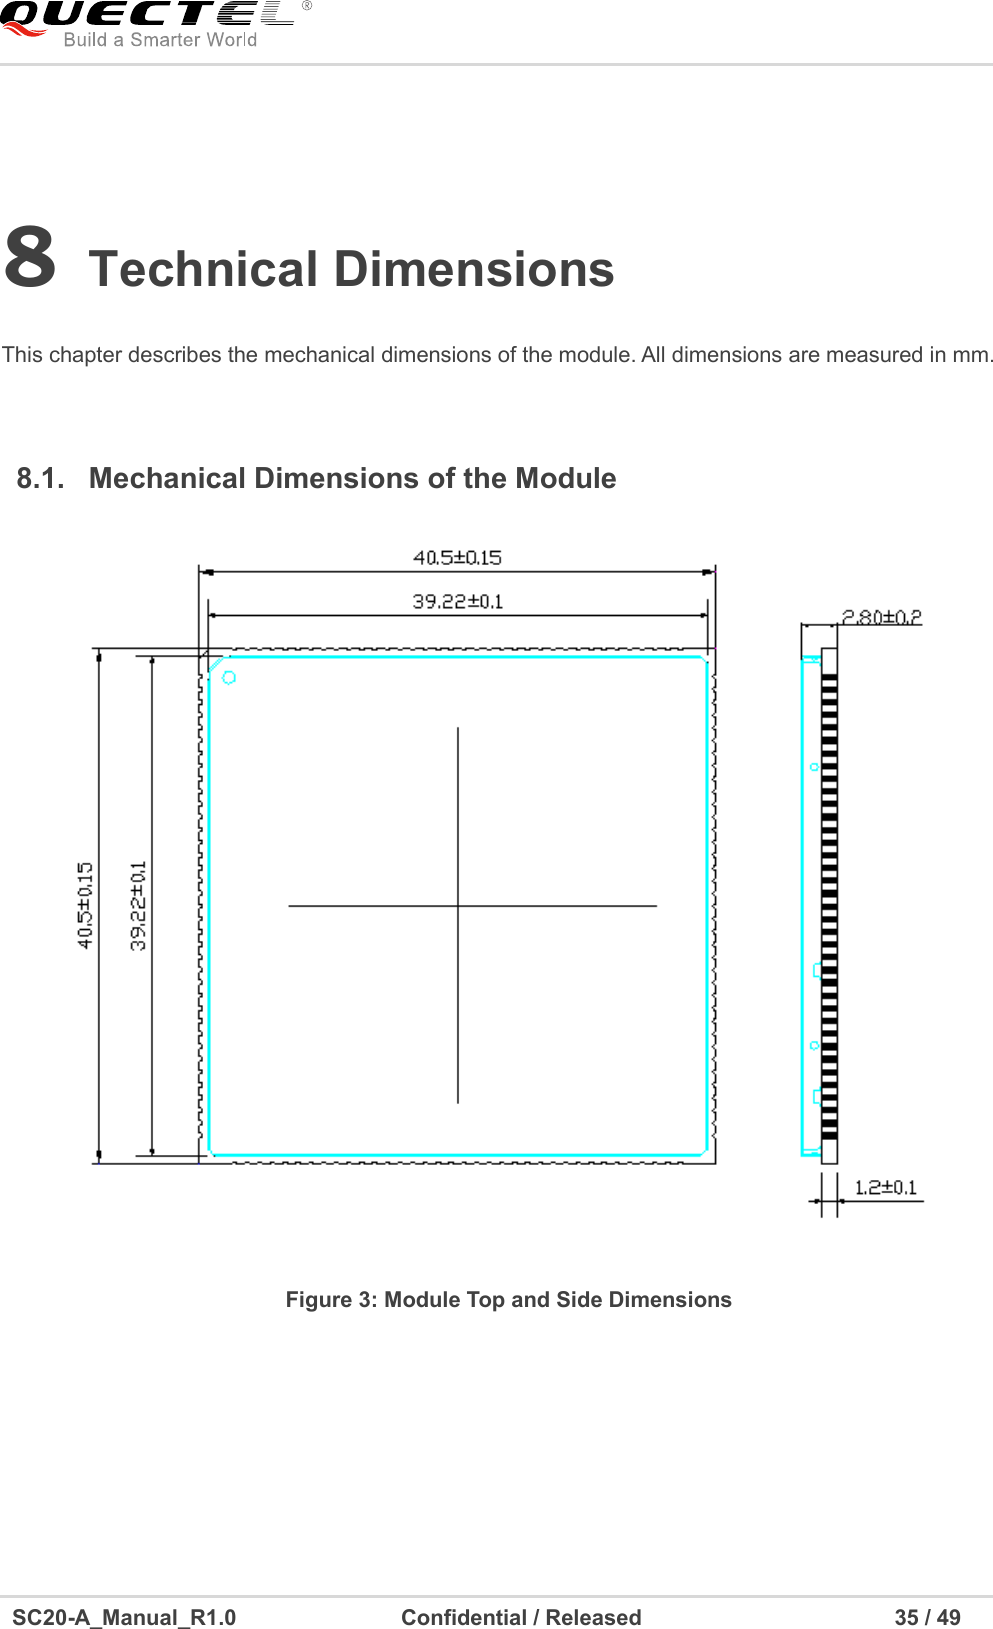     SC20-A_Manual_R1.0                              Confidential / Released                                              35 / 49    8 Technical Dimensions  This chapter describes the mechanical dimensions of the module. All dimensions are measured in mm.  8.1.  Mechanical Dimensions of the Module  Figure 3: Module Top and Side Dimensions  